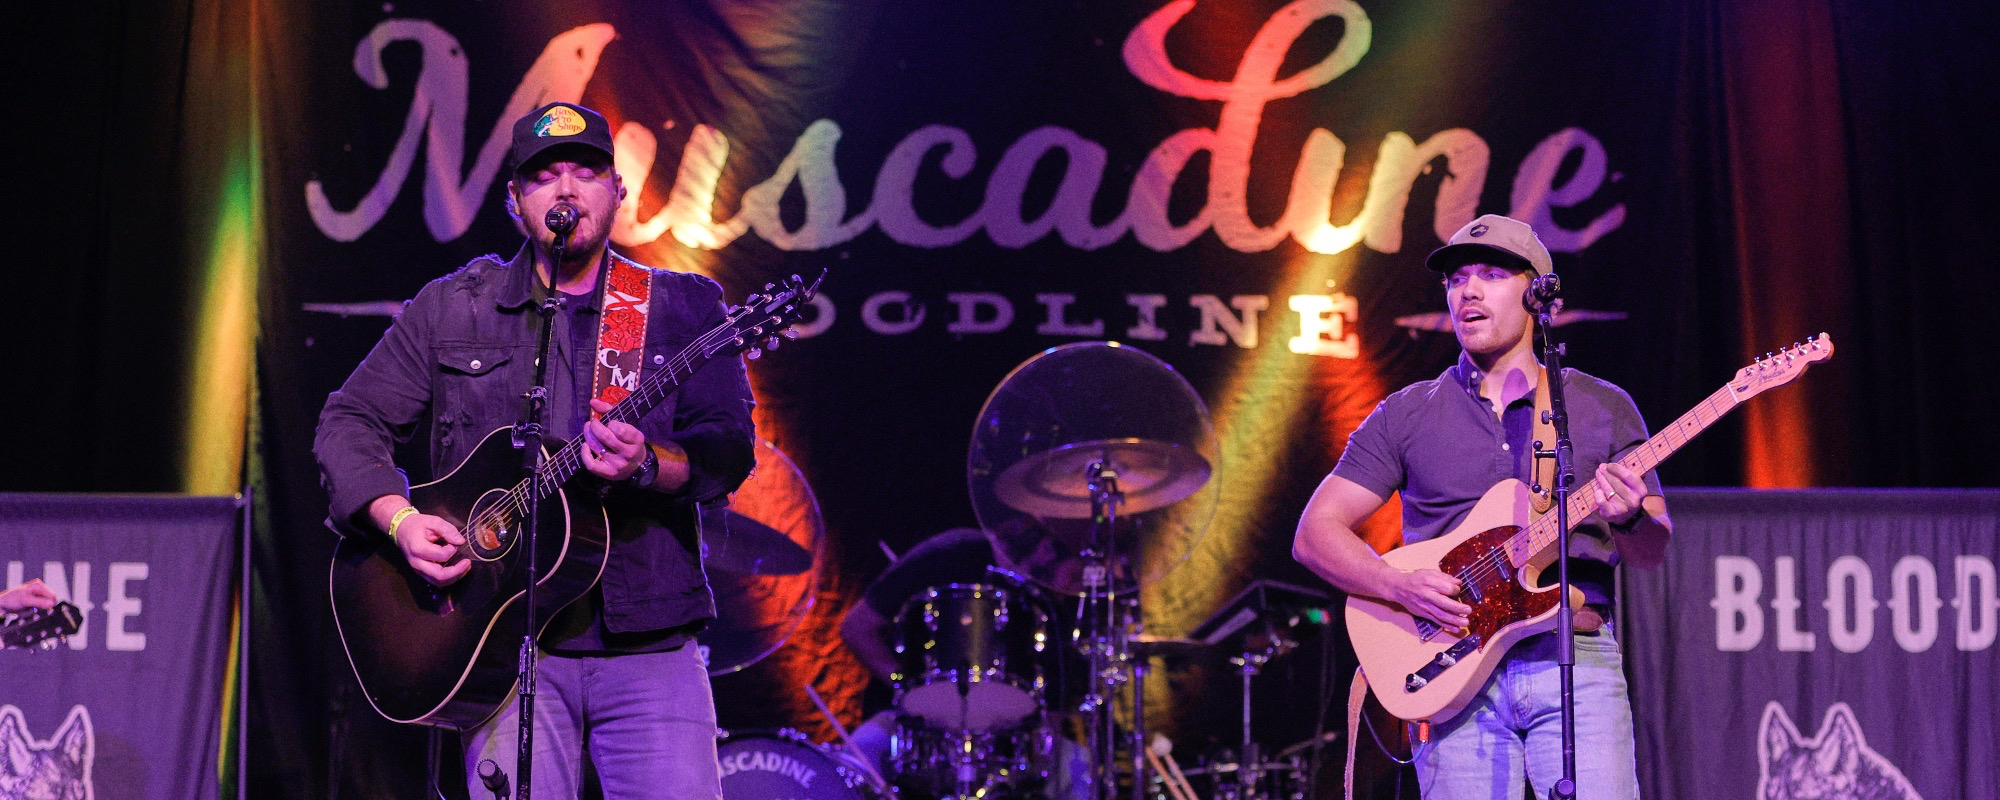 Muscadine Bloodline Drops Surprise EP of Emo Covers